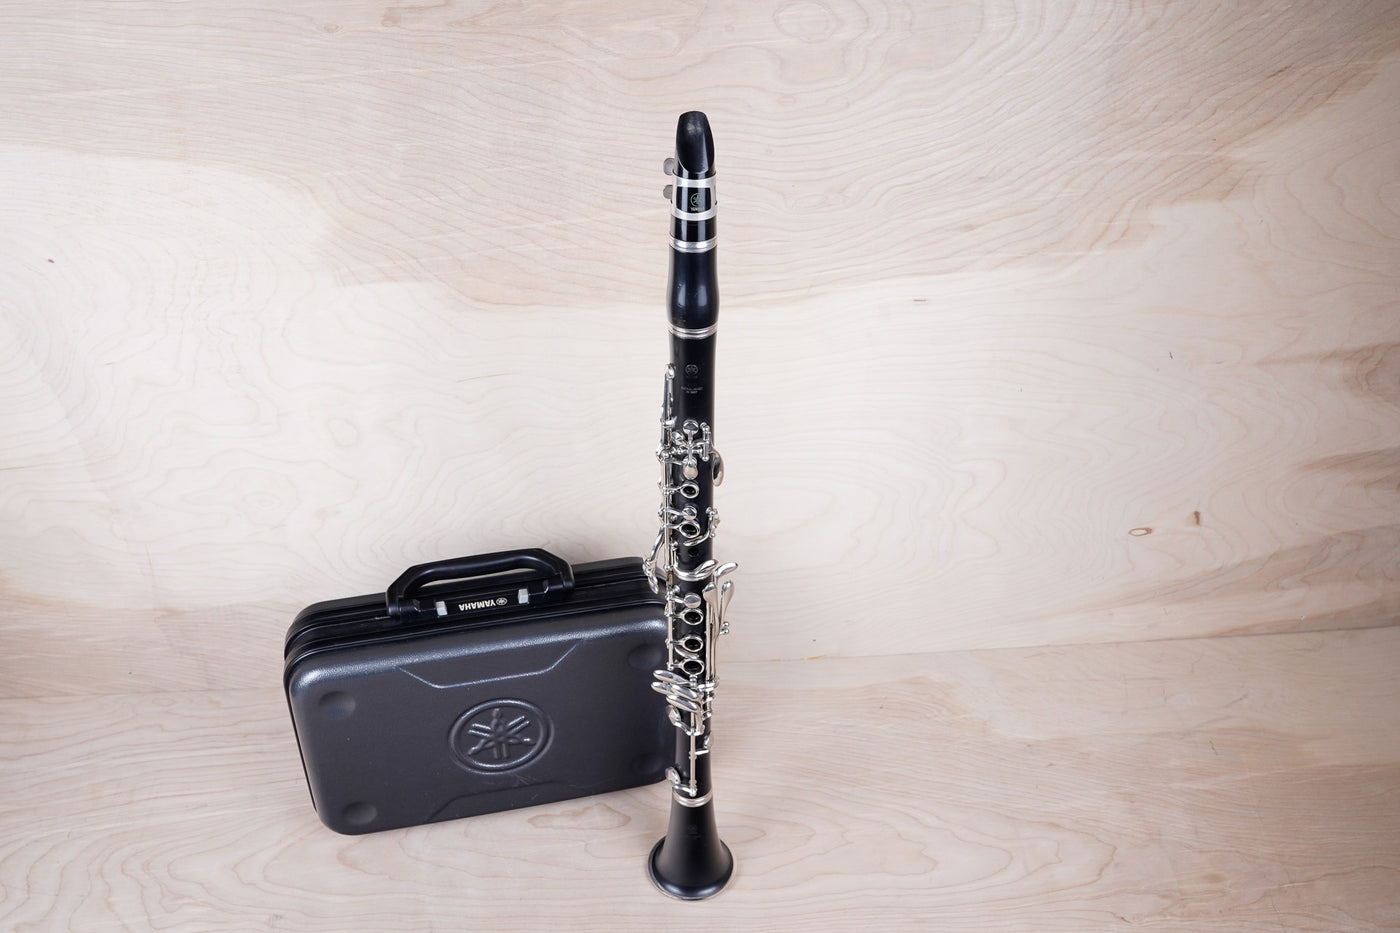 Yamaha YCL-250 Bb Student Clarinet 2010 Made in Japan MIJ